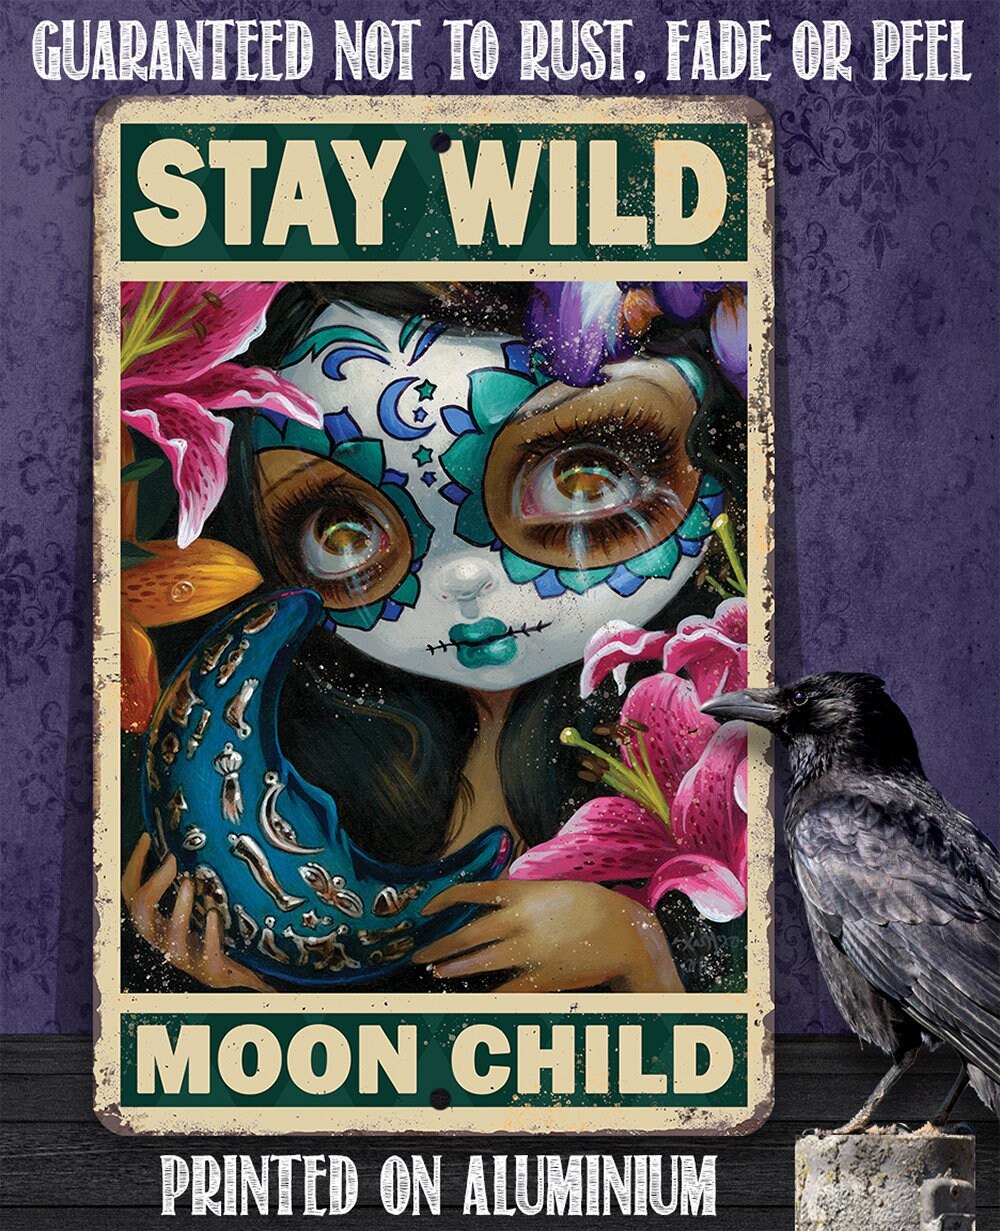 Stay Wild Moon Child - 8" x 12" or 12" x 18" Aluminum Tin Awesome Gothic Metal Poster Lone Star Art 